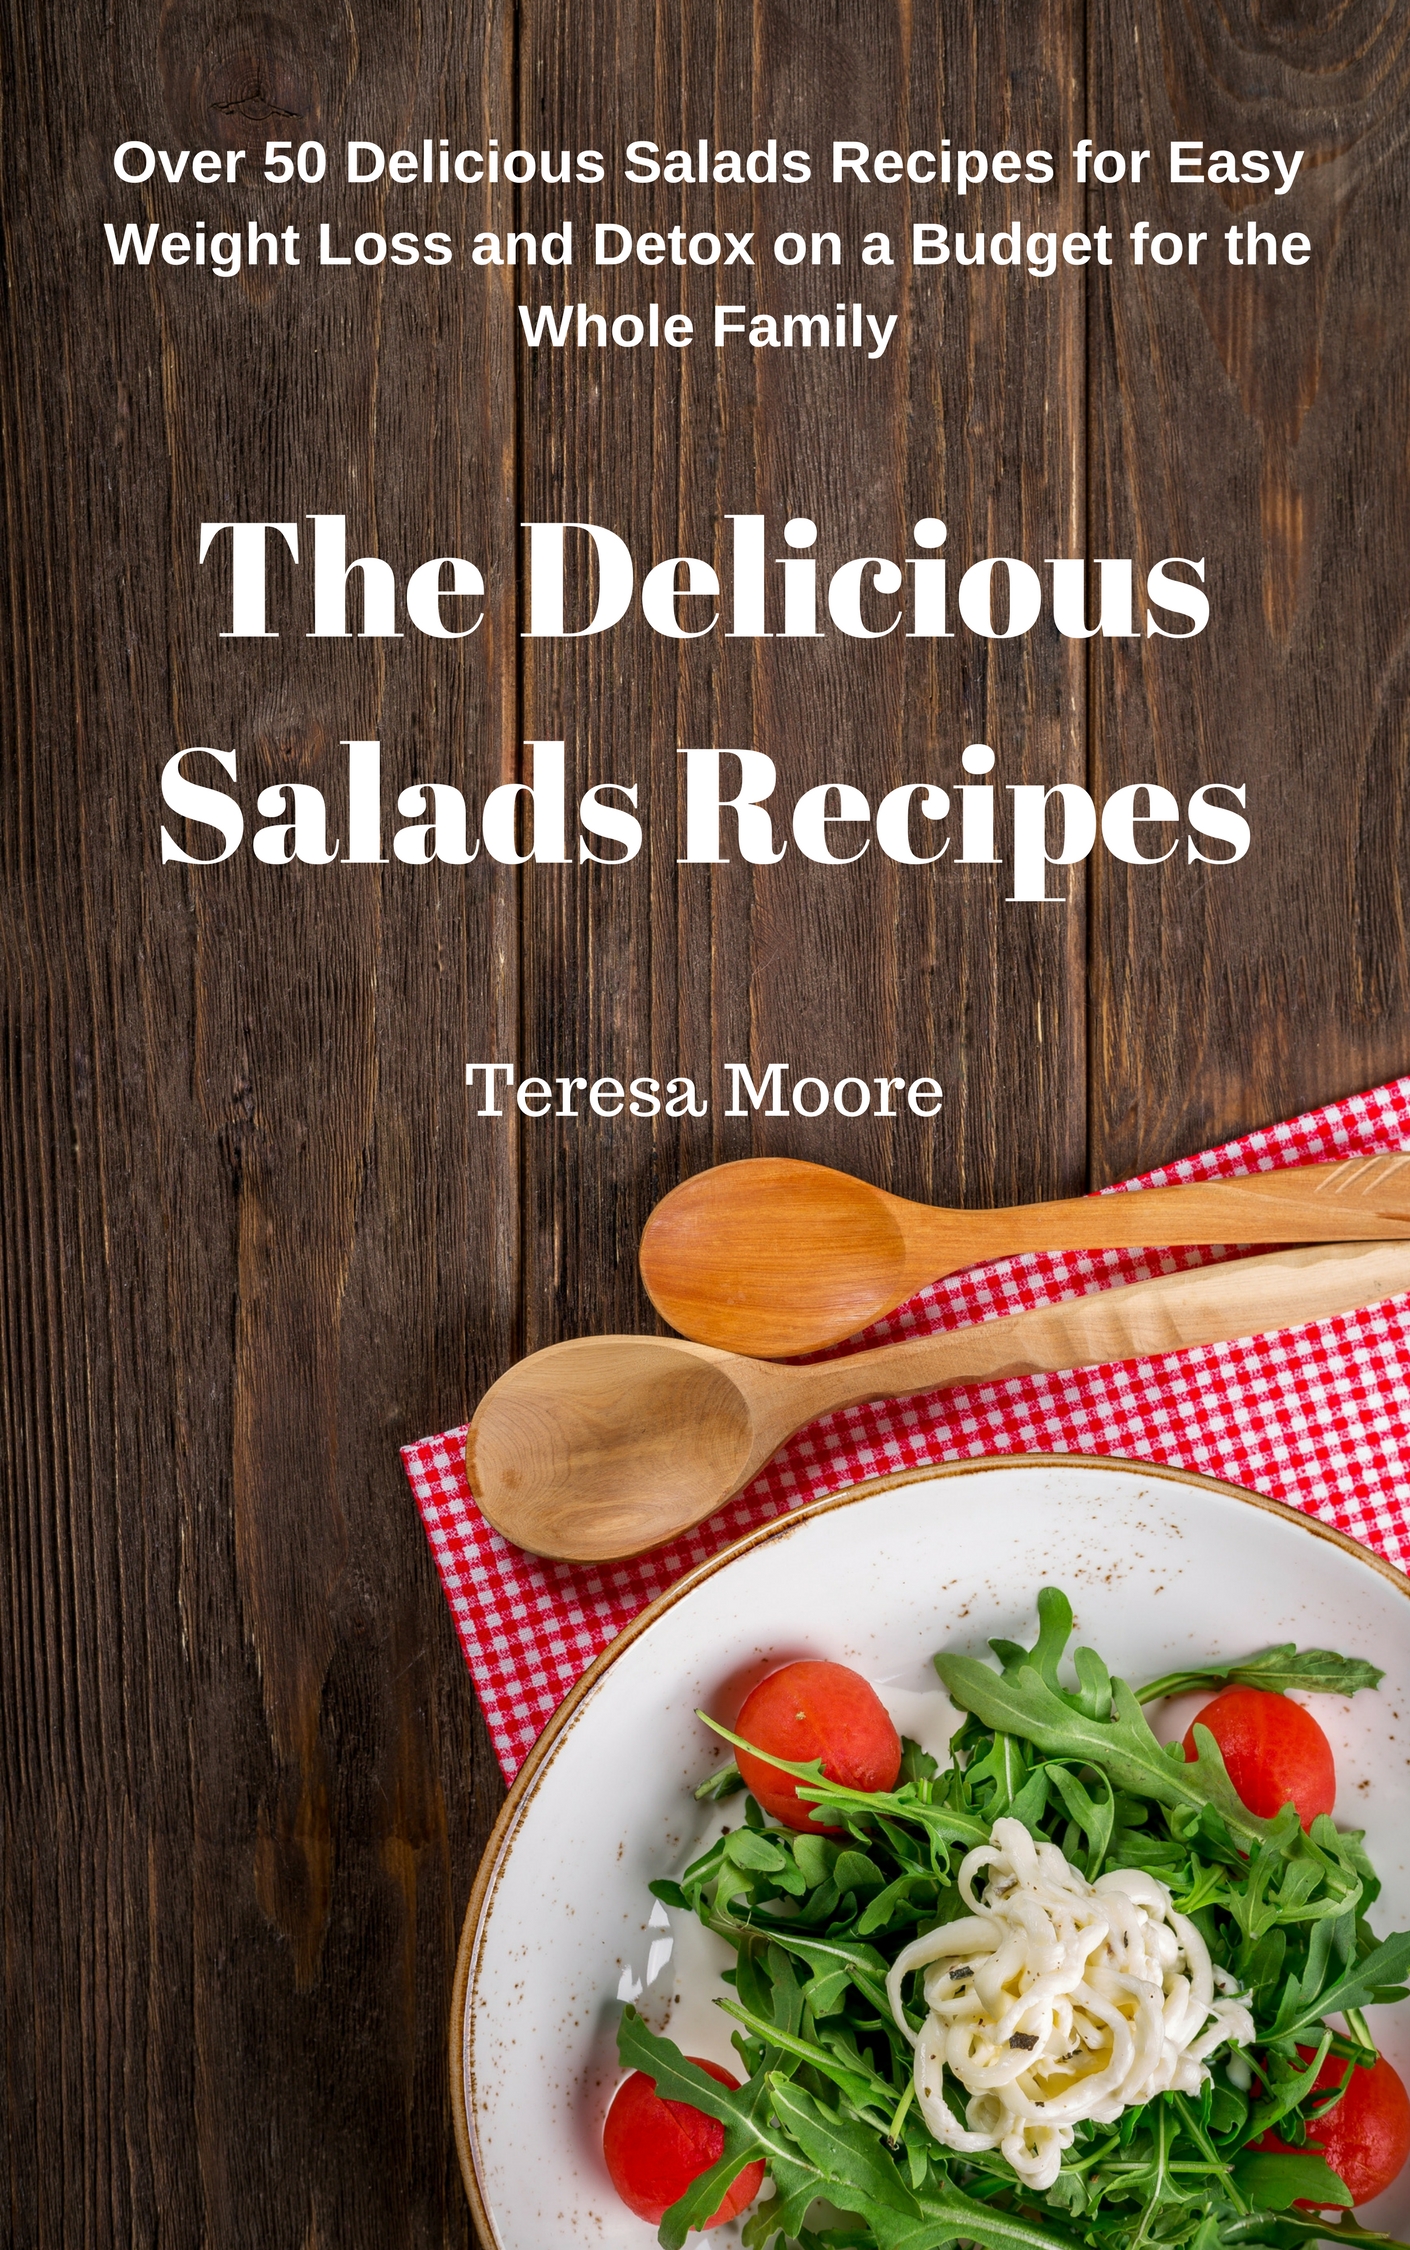 FREE: The Delicious Salads Recipes: Over 50 Delicious Salads Recipes for Easy Weight Loss and Detox on a Budget for the Whole Family by Teresa Moore